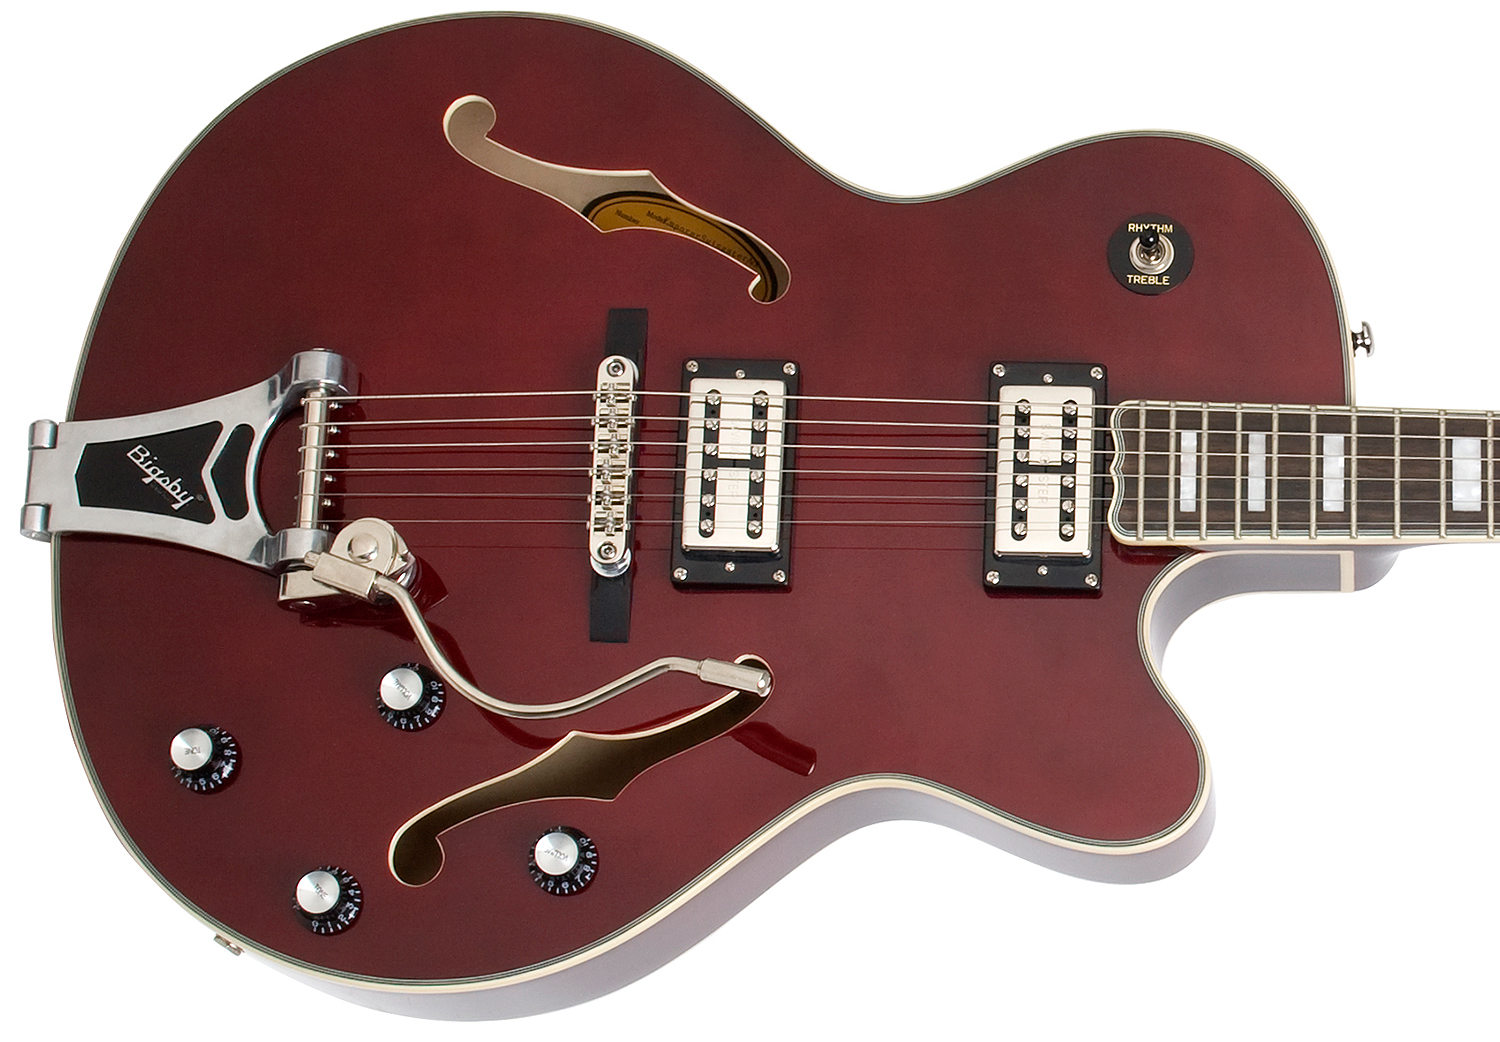 Epiphone Emperor Swingster Bigsby Gh - Wine Red - Hollowbody E-Gitarre - Variation 1